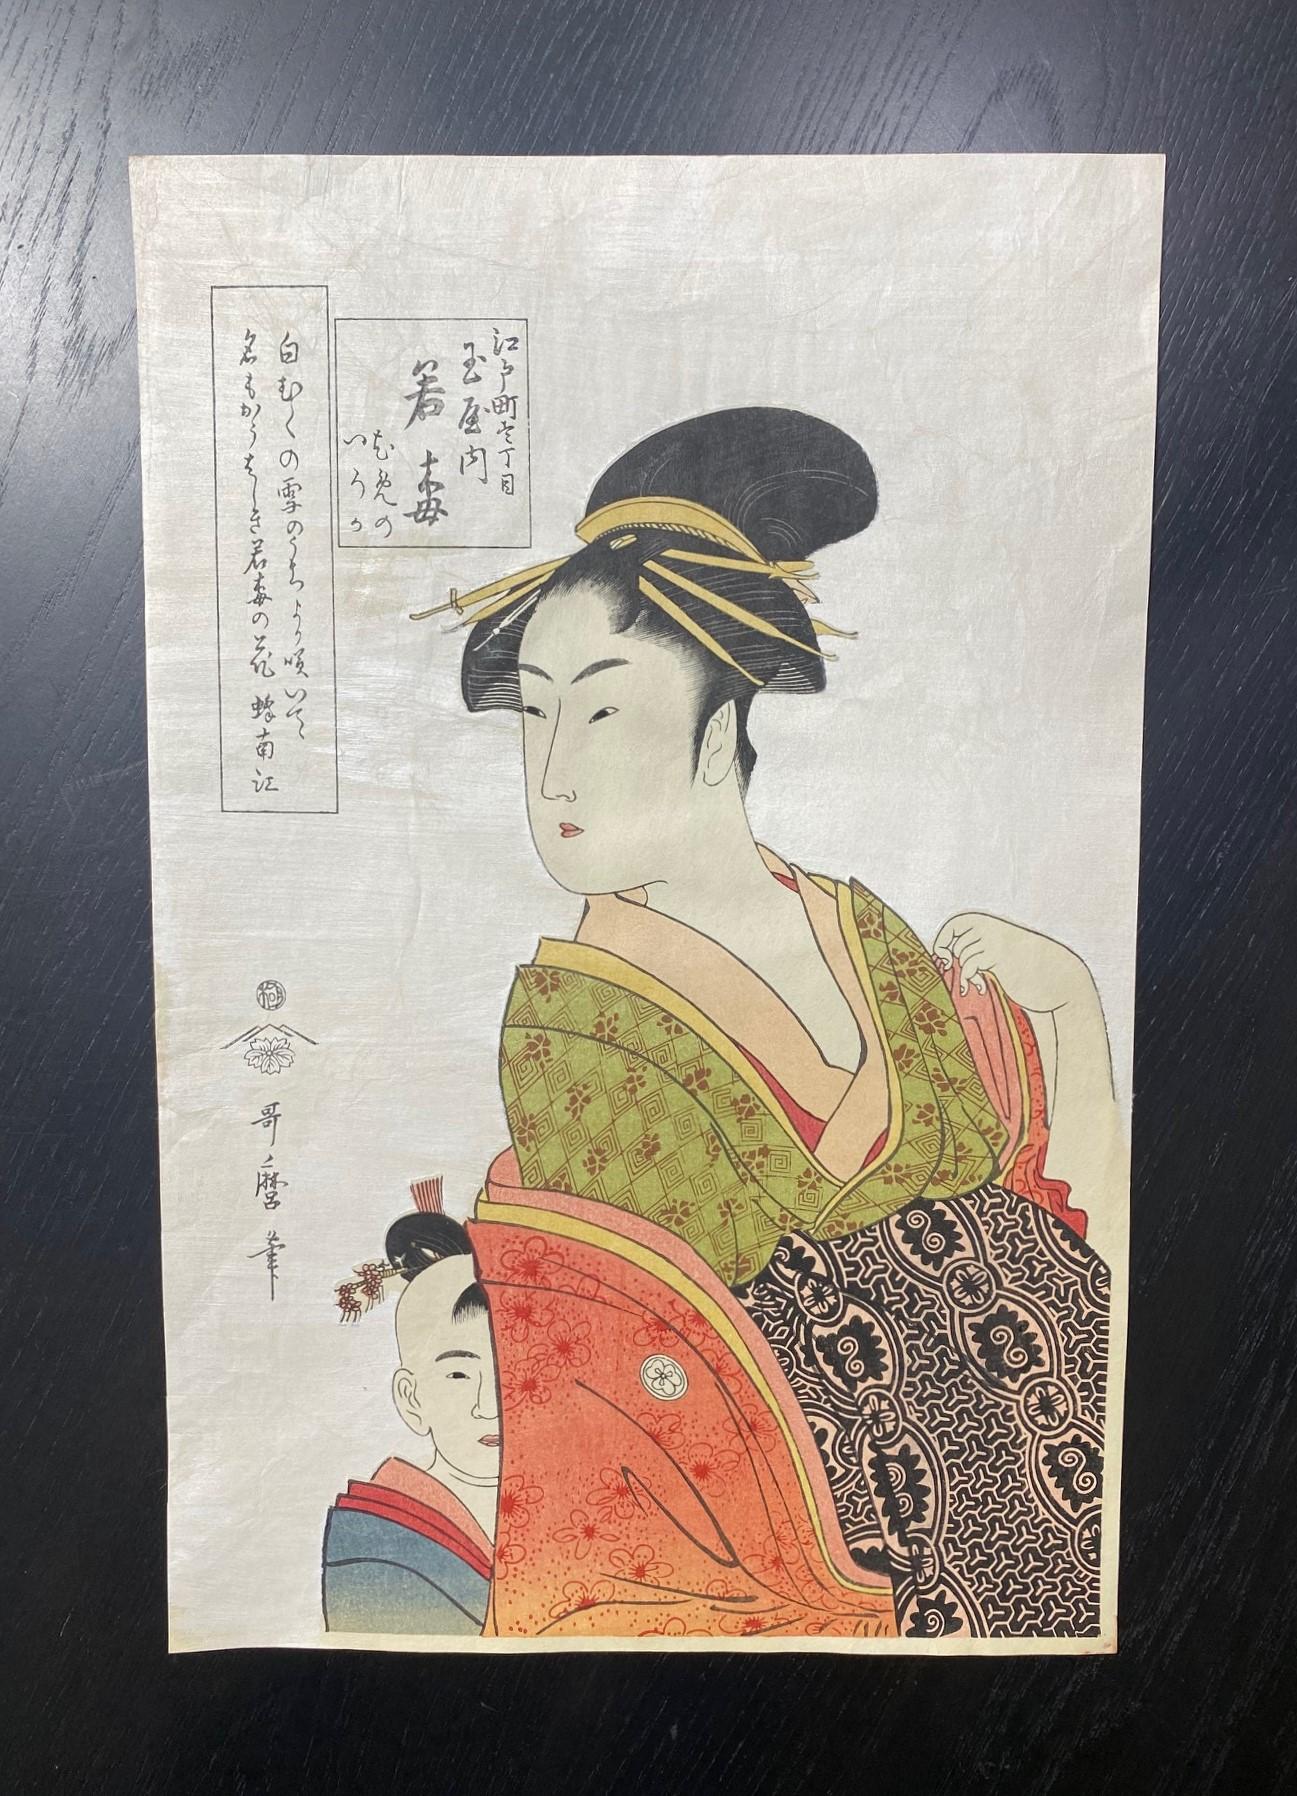 A beautifully composed and subtly colored Japanese woodblock print featuring a high-ranking noblewoman and her young attendant.  The work is by Kitagawa Utamaro and is titled 